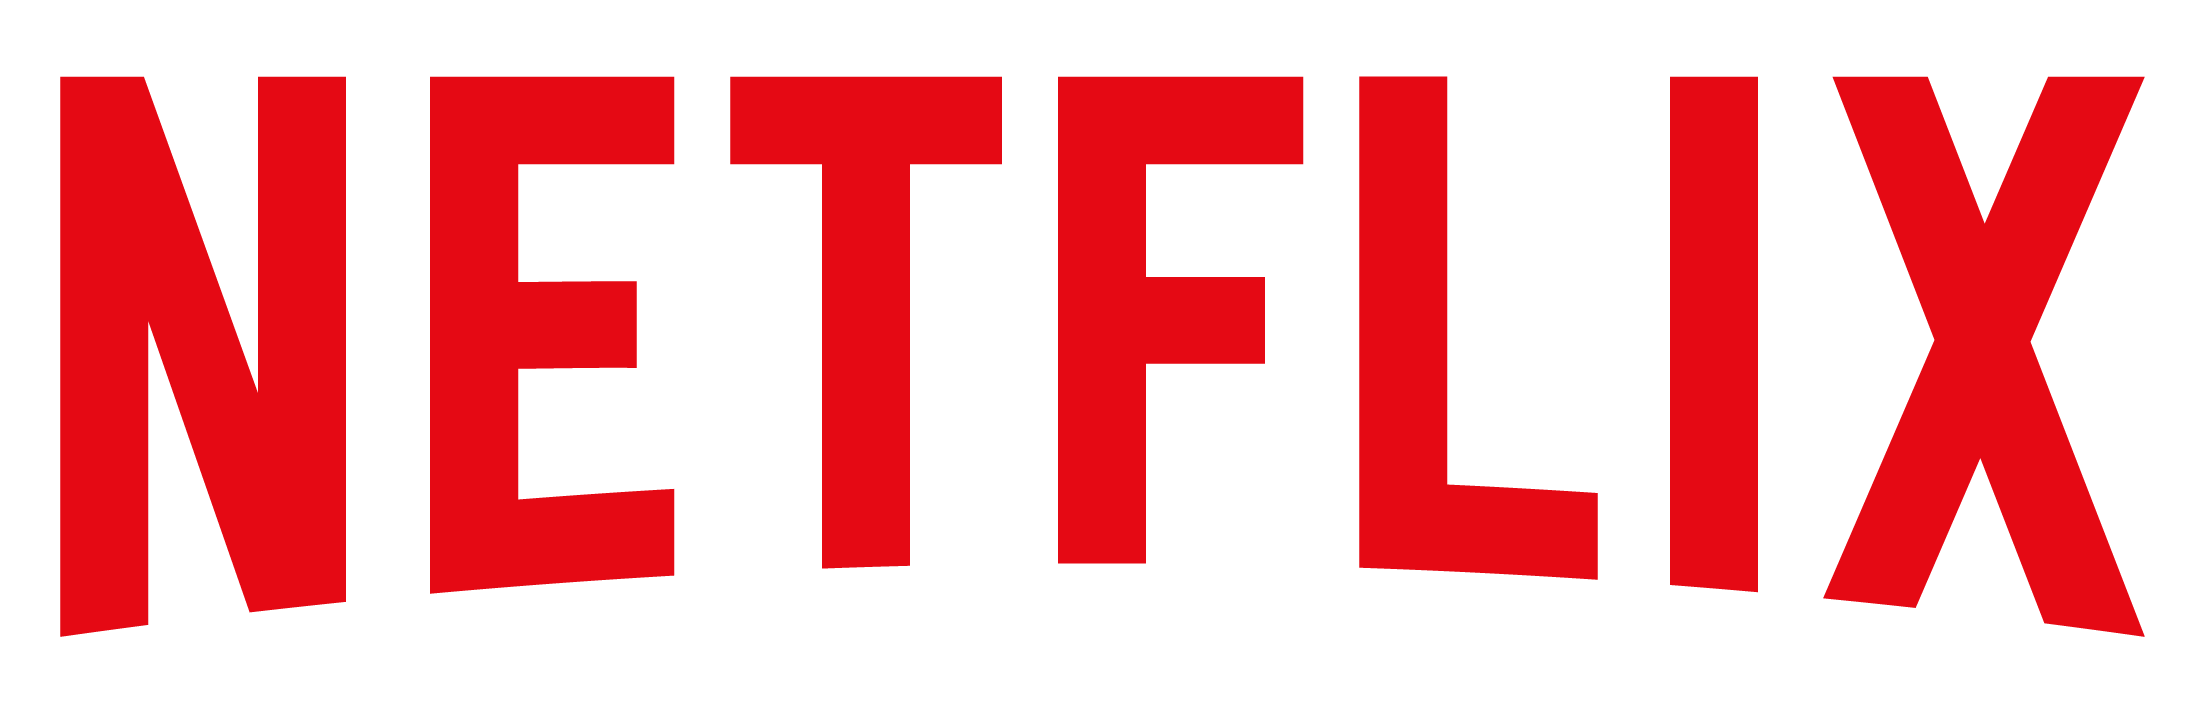 Television Show Media Netflix Streaming Text Red PNG Image